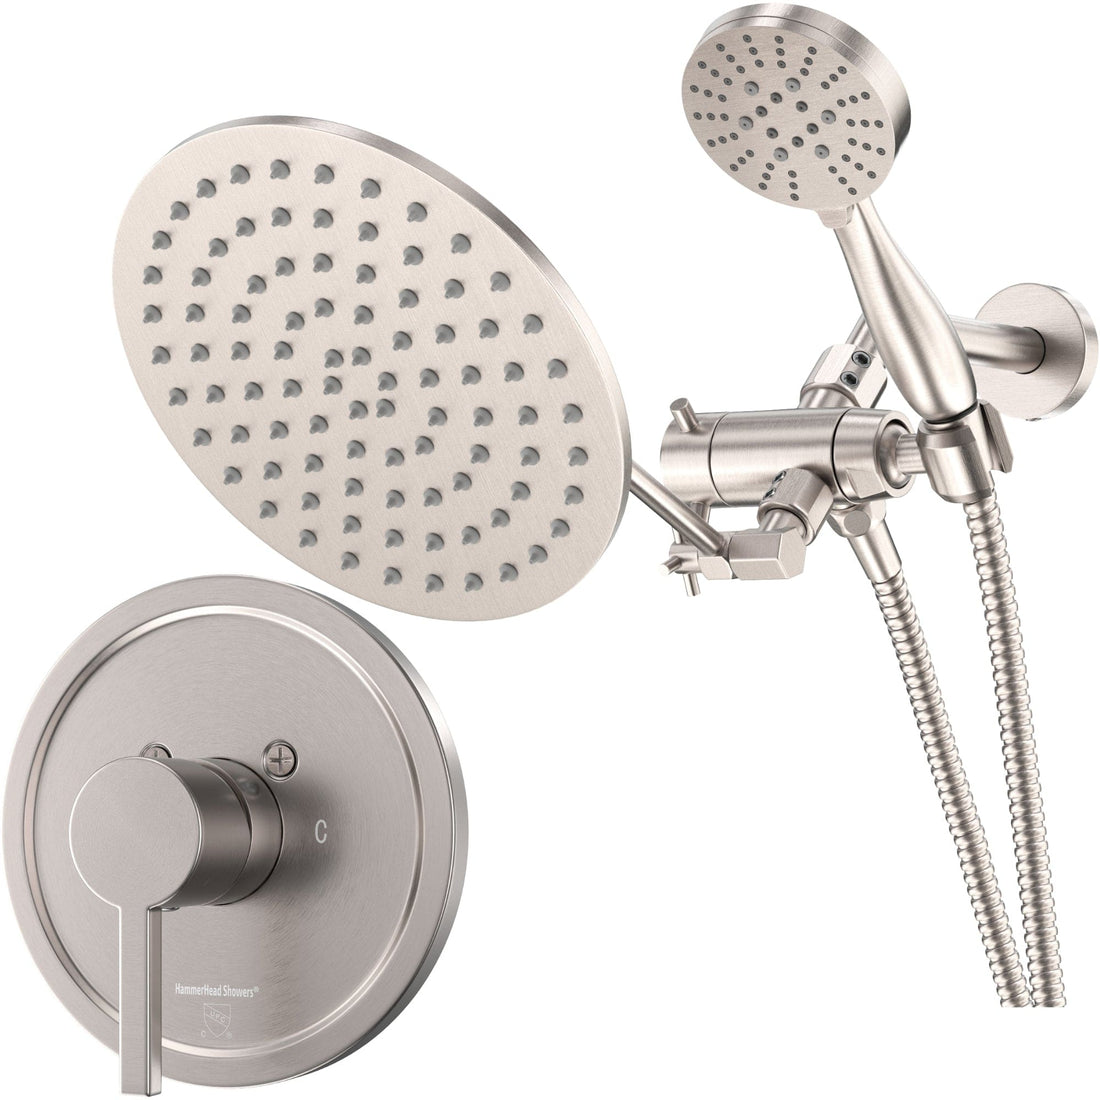 Main Image All Metal Dual Shower Head with Adjustable Arm - Complete Shower System with Valve and Trim Brushed Nickel  / 2.5 - The Shower Head Store